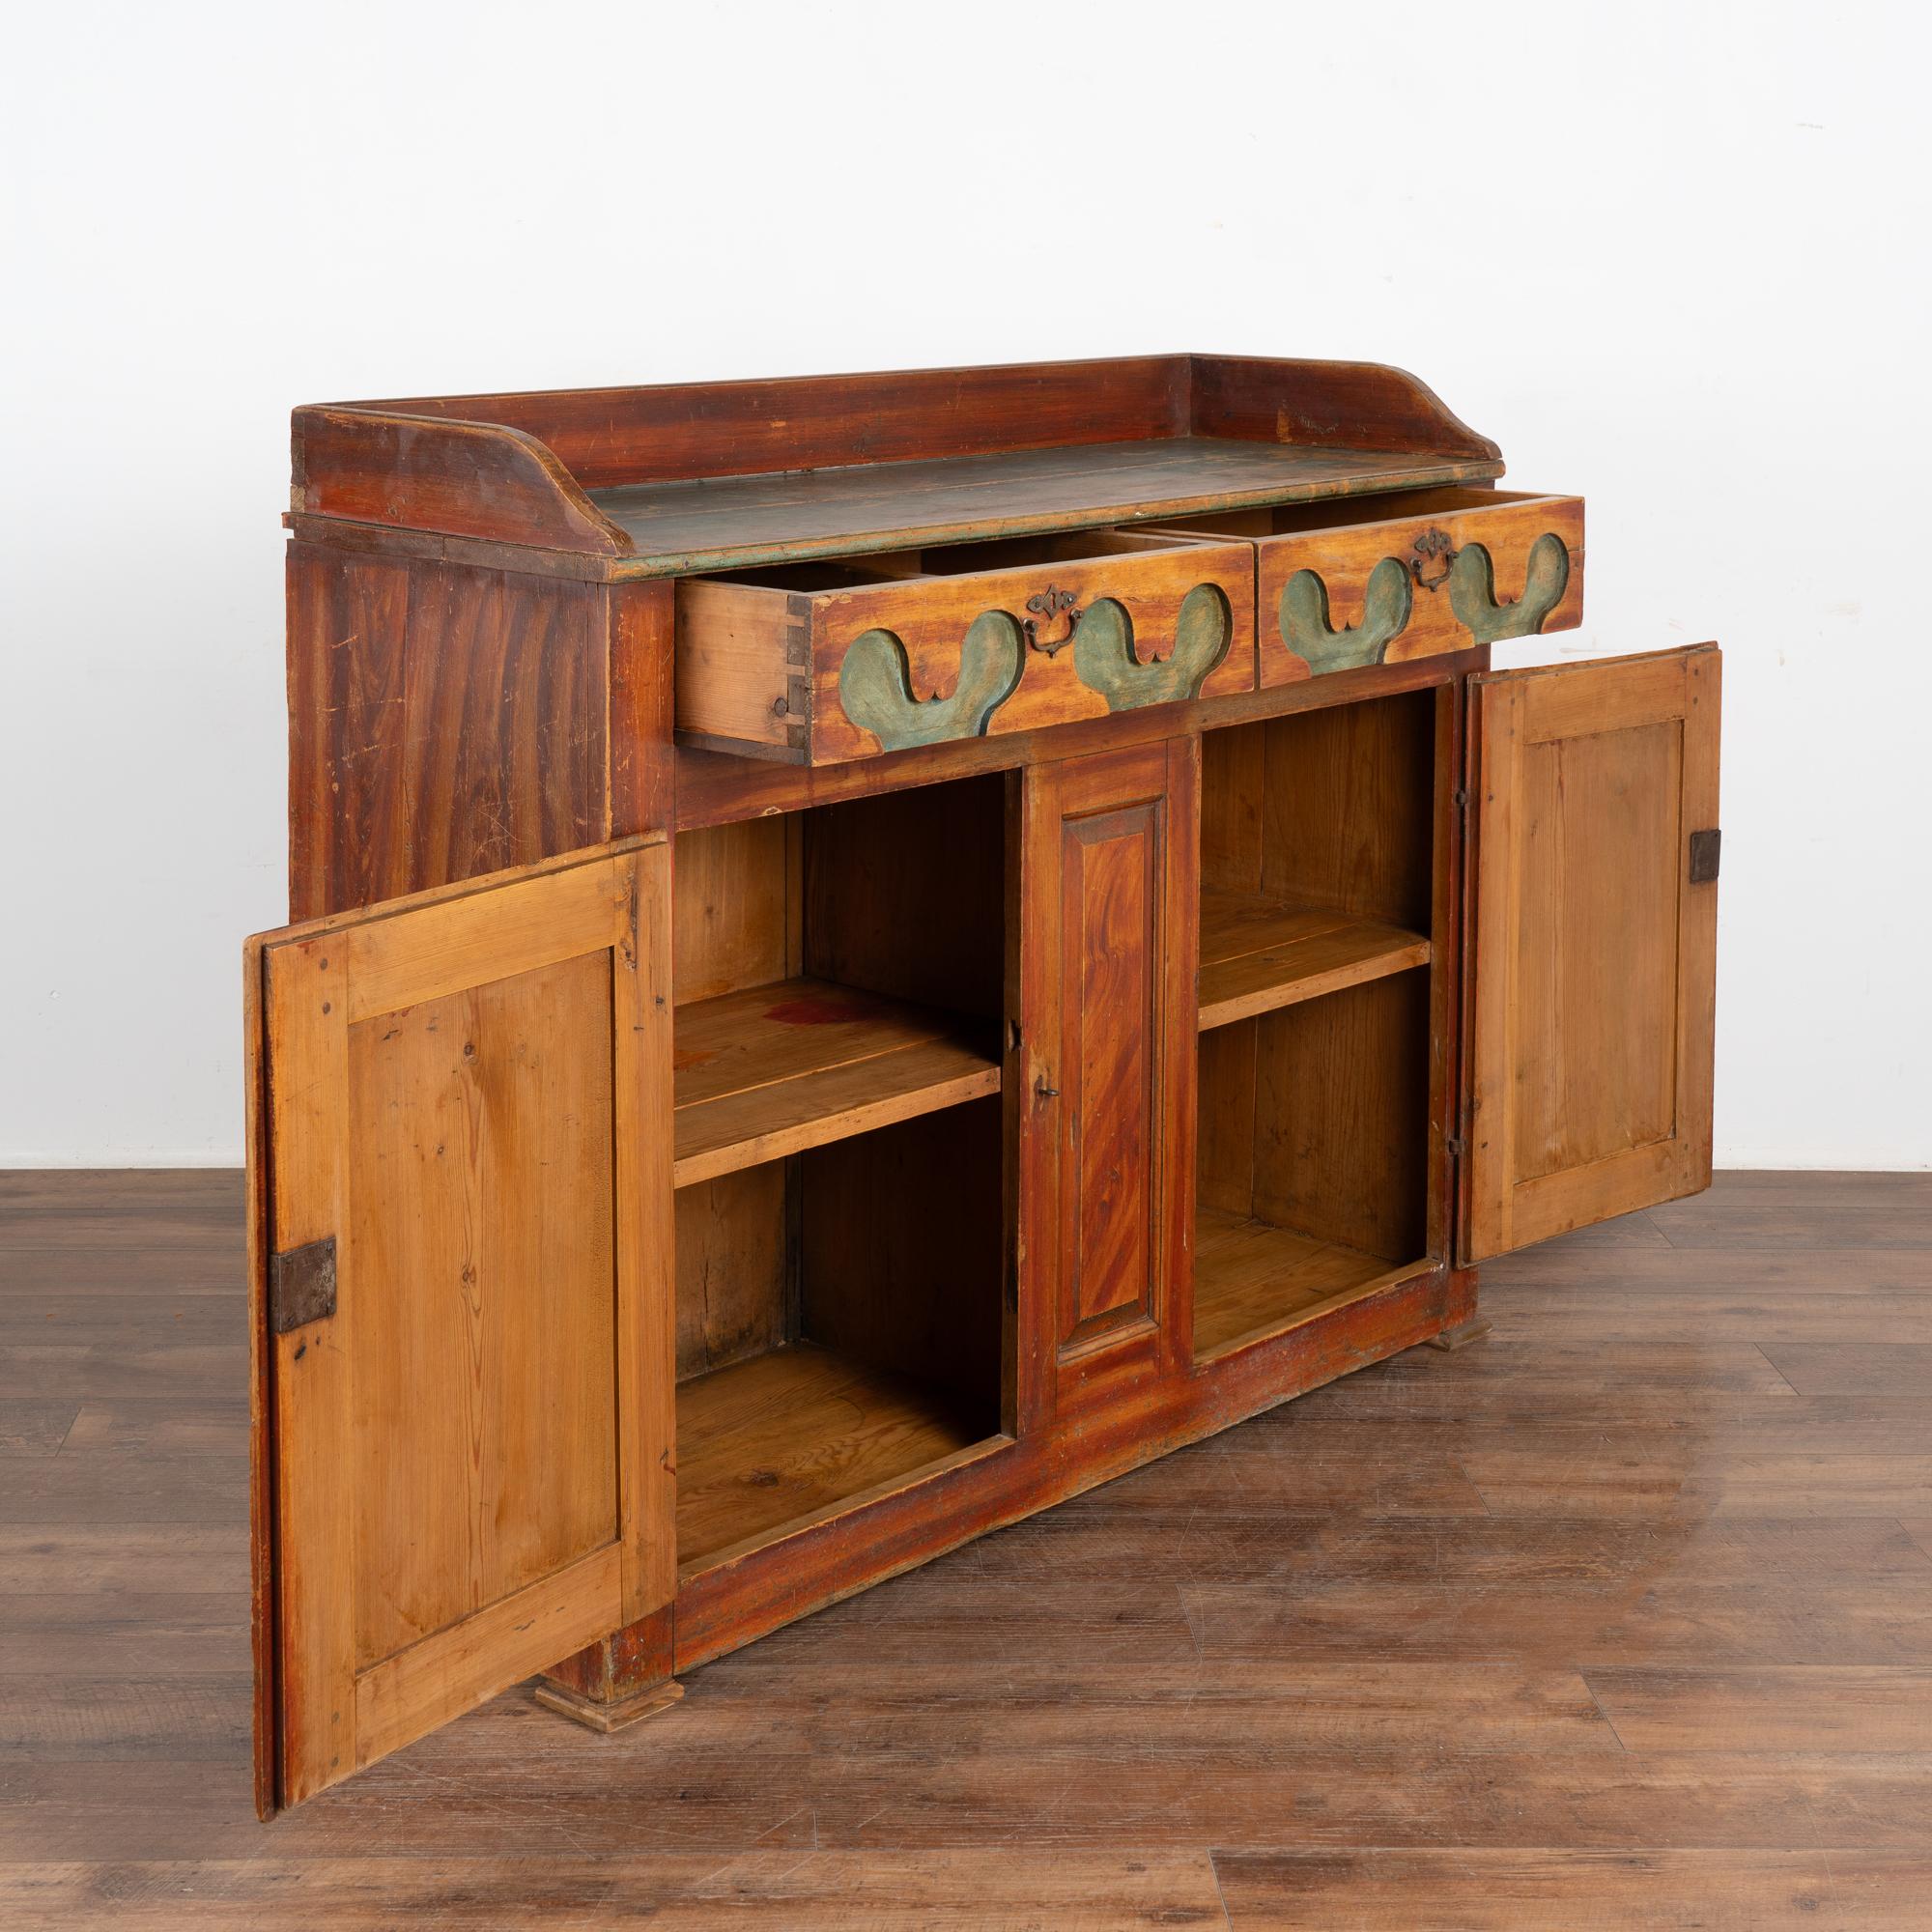 Country Original Painted Sideboard Cabinet from Sweden, circa 1820-40 For Sale